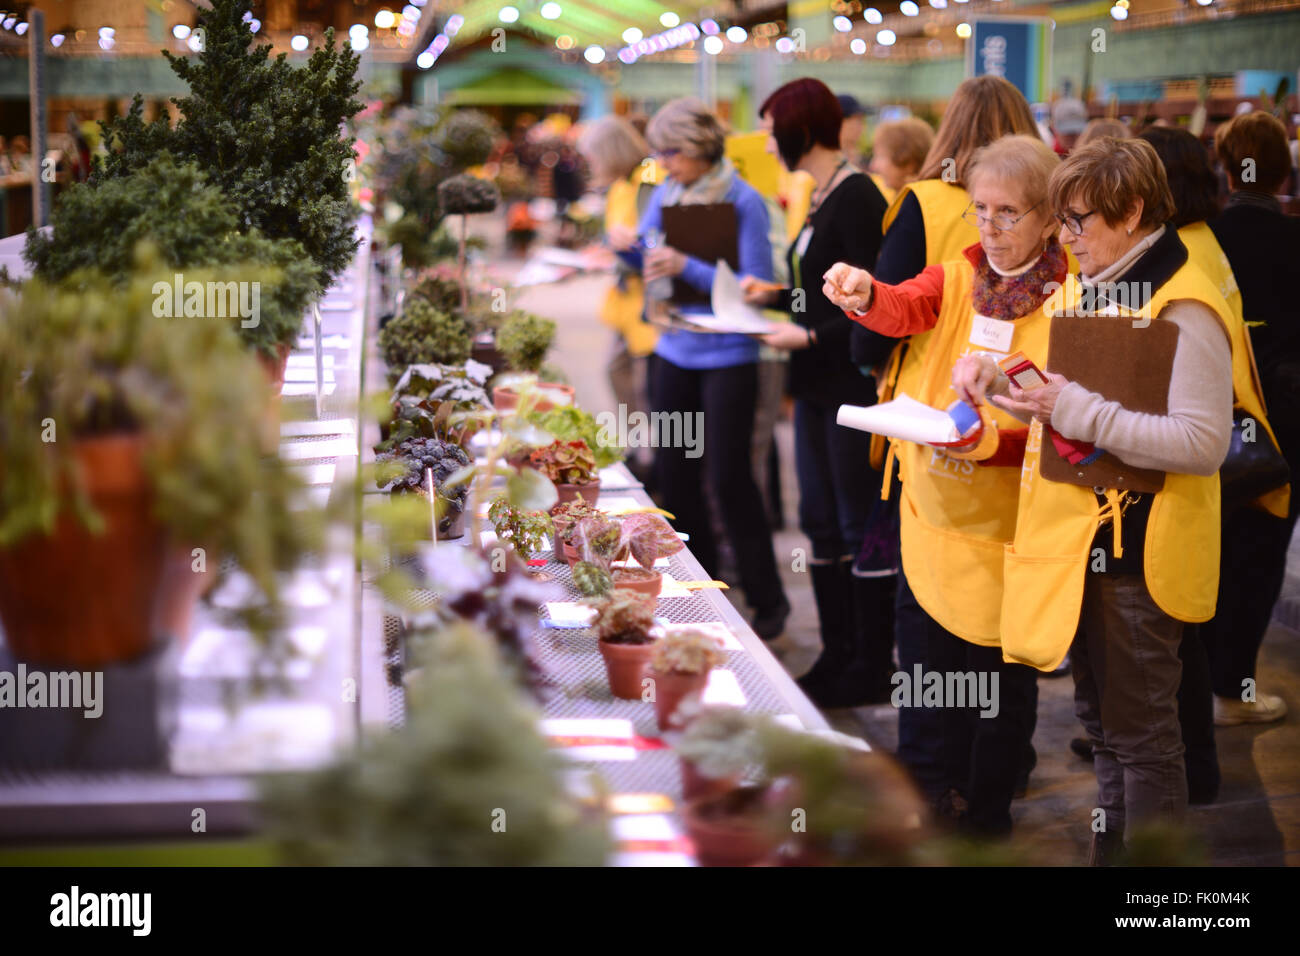 Philadelphia, USA. 4th March, 2016. Judging is in progress at the PHS Flower Show. 'Explore America' is the theme for the 2016 edition of the Pennsylvania Horticulture Society Flower Show. The annual show, the largest in its kind, is held at the Pennsylvania Convention Center in Center City Philadelphia PA., and runs till March 13. Credit:  Bastiaan Slabbers/Alamy Live News Stock Photo